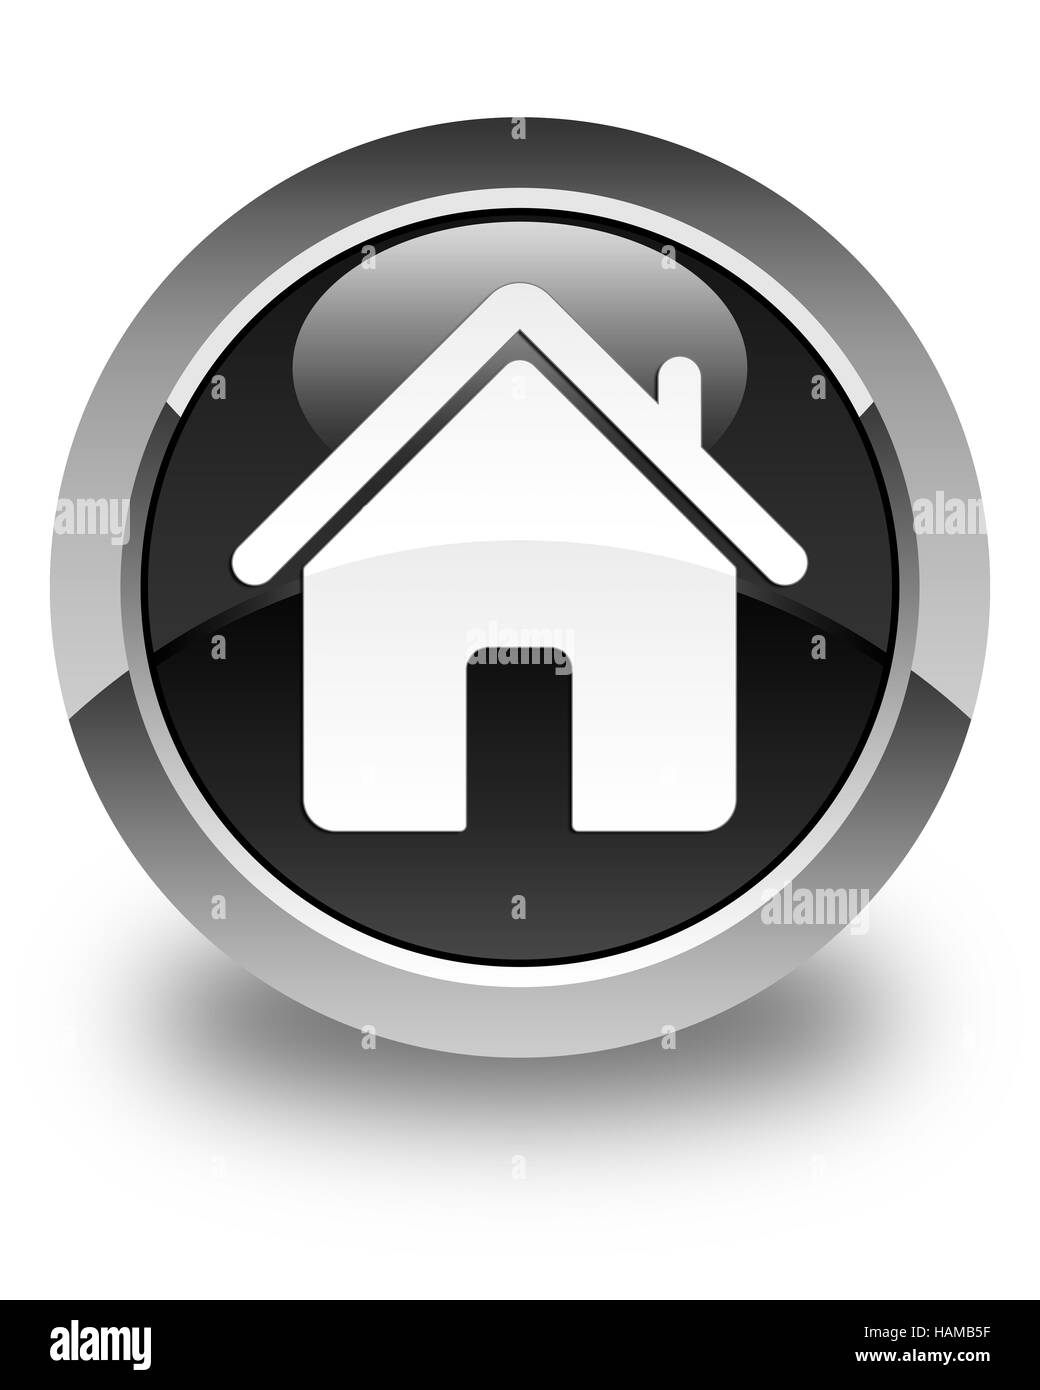 Home icon isolated on glossy black round button abstract illustration Stock Photo